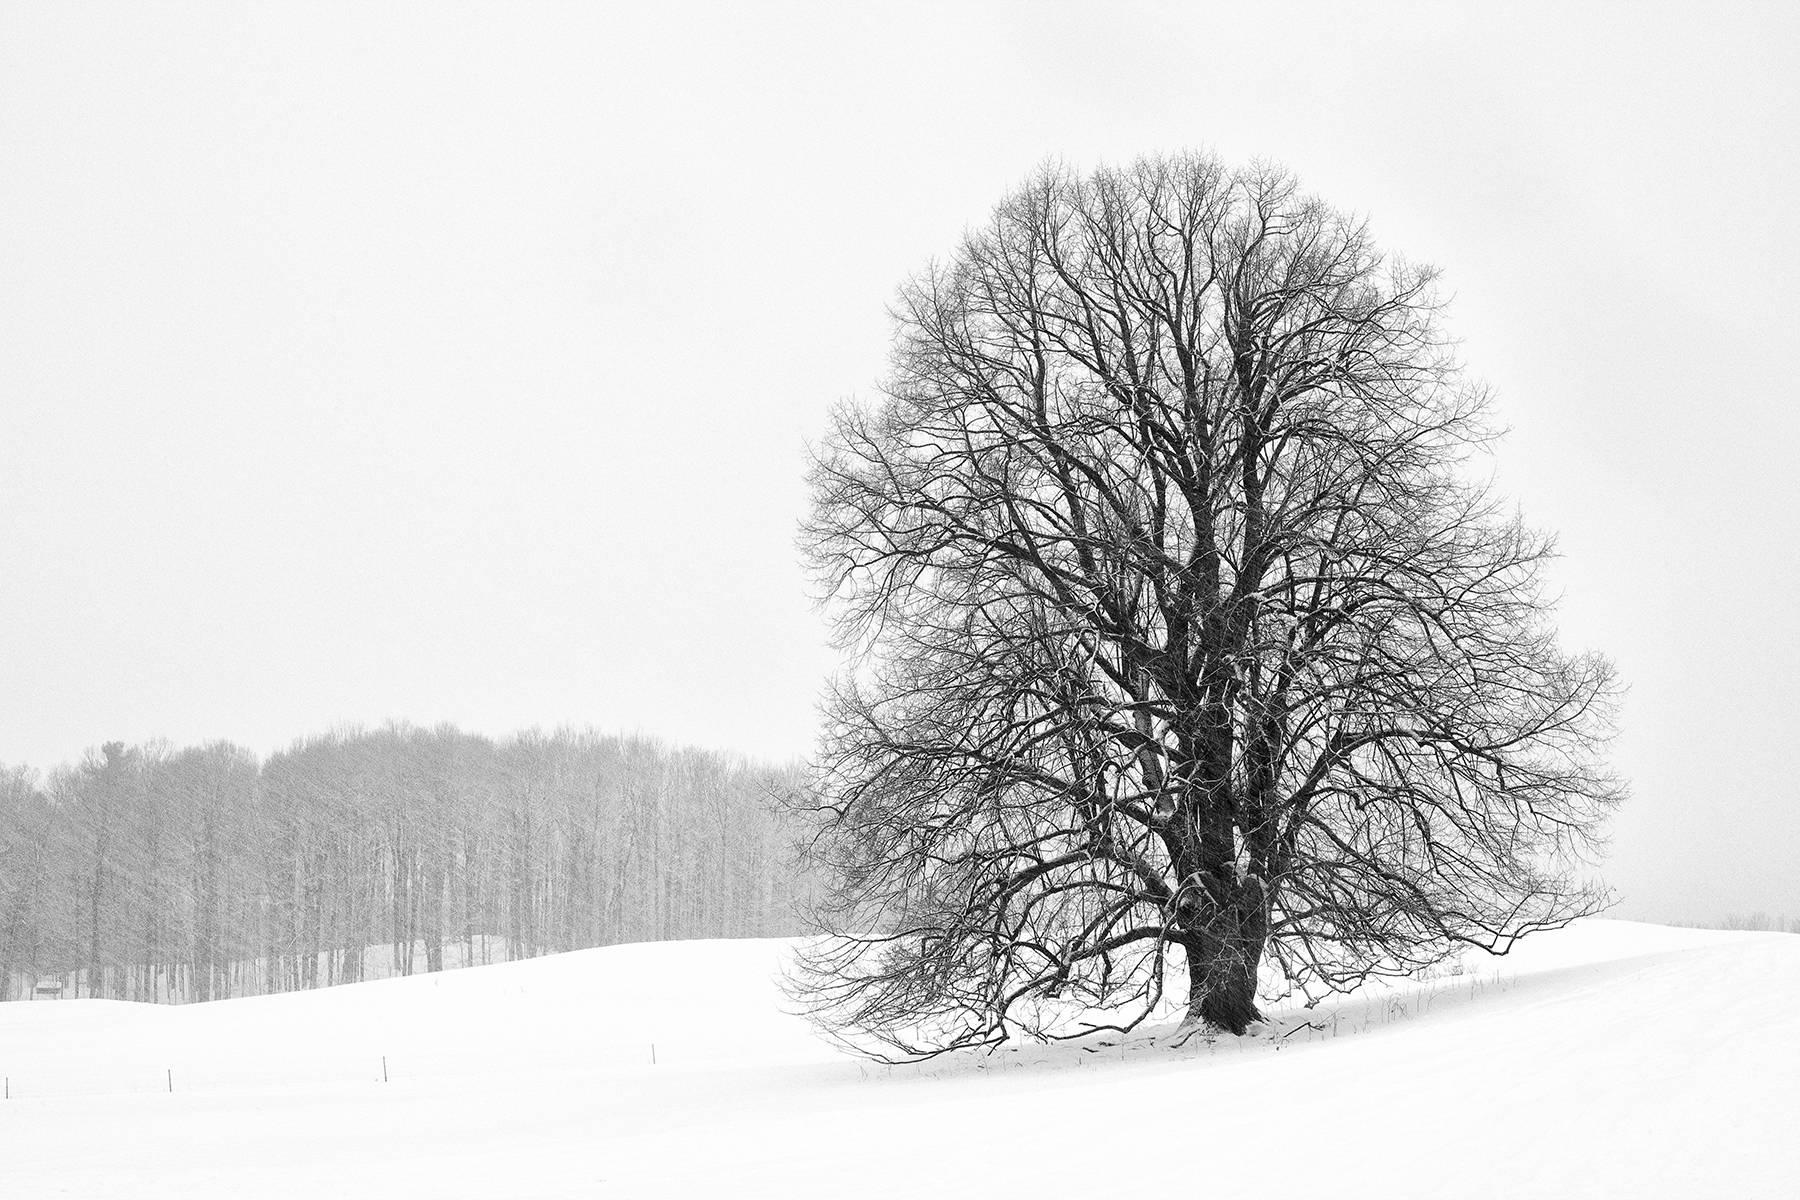 Rebecca Skinner Landscape Photograph - "Lonely Tree", landscape, black and white, winter, snow, New England, photograph